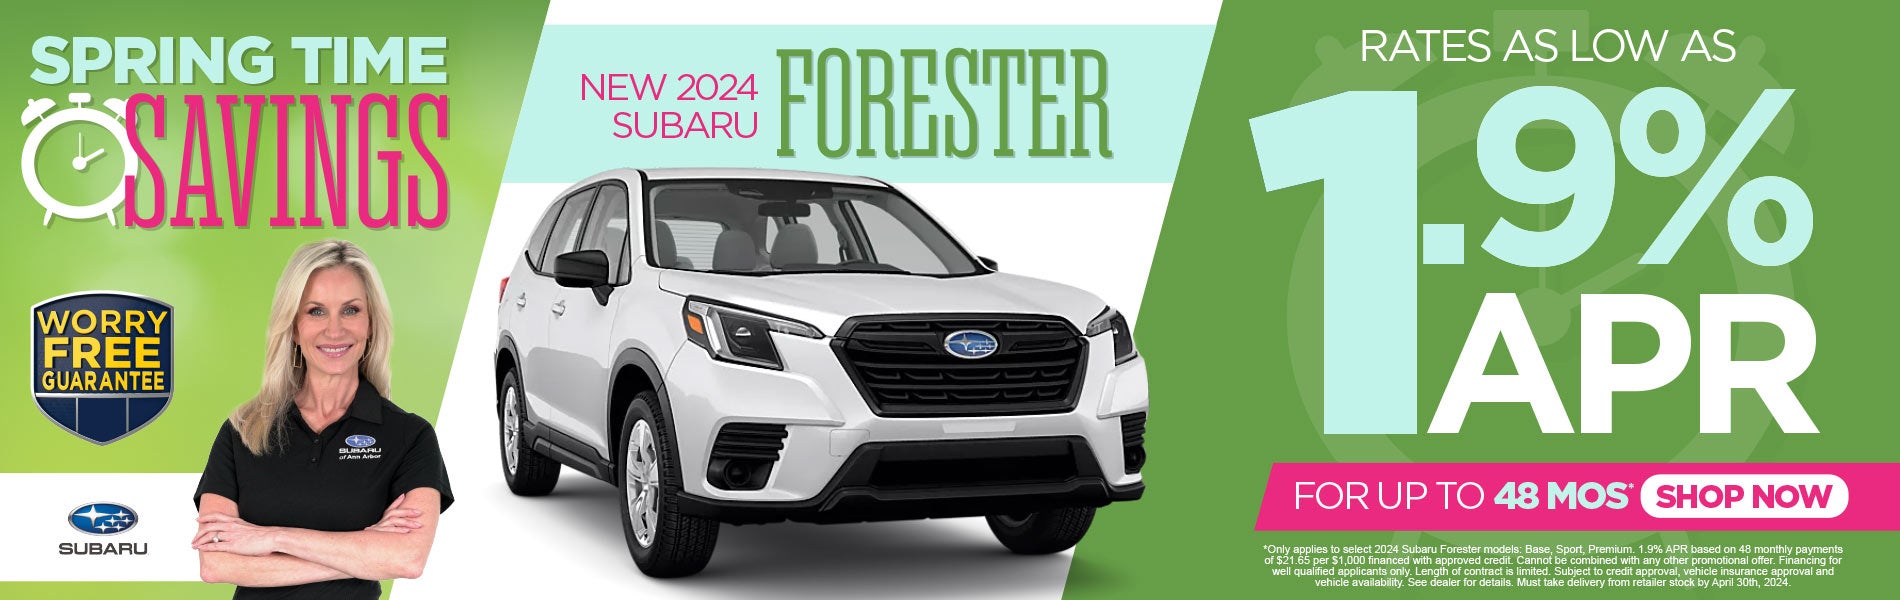 New 2024 Subaru Forester rates as low as 1.9%